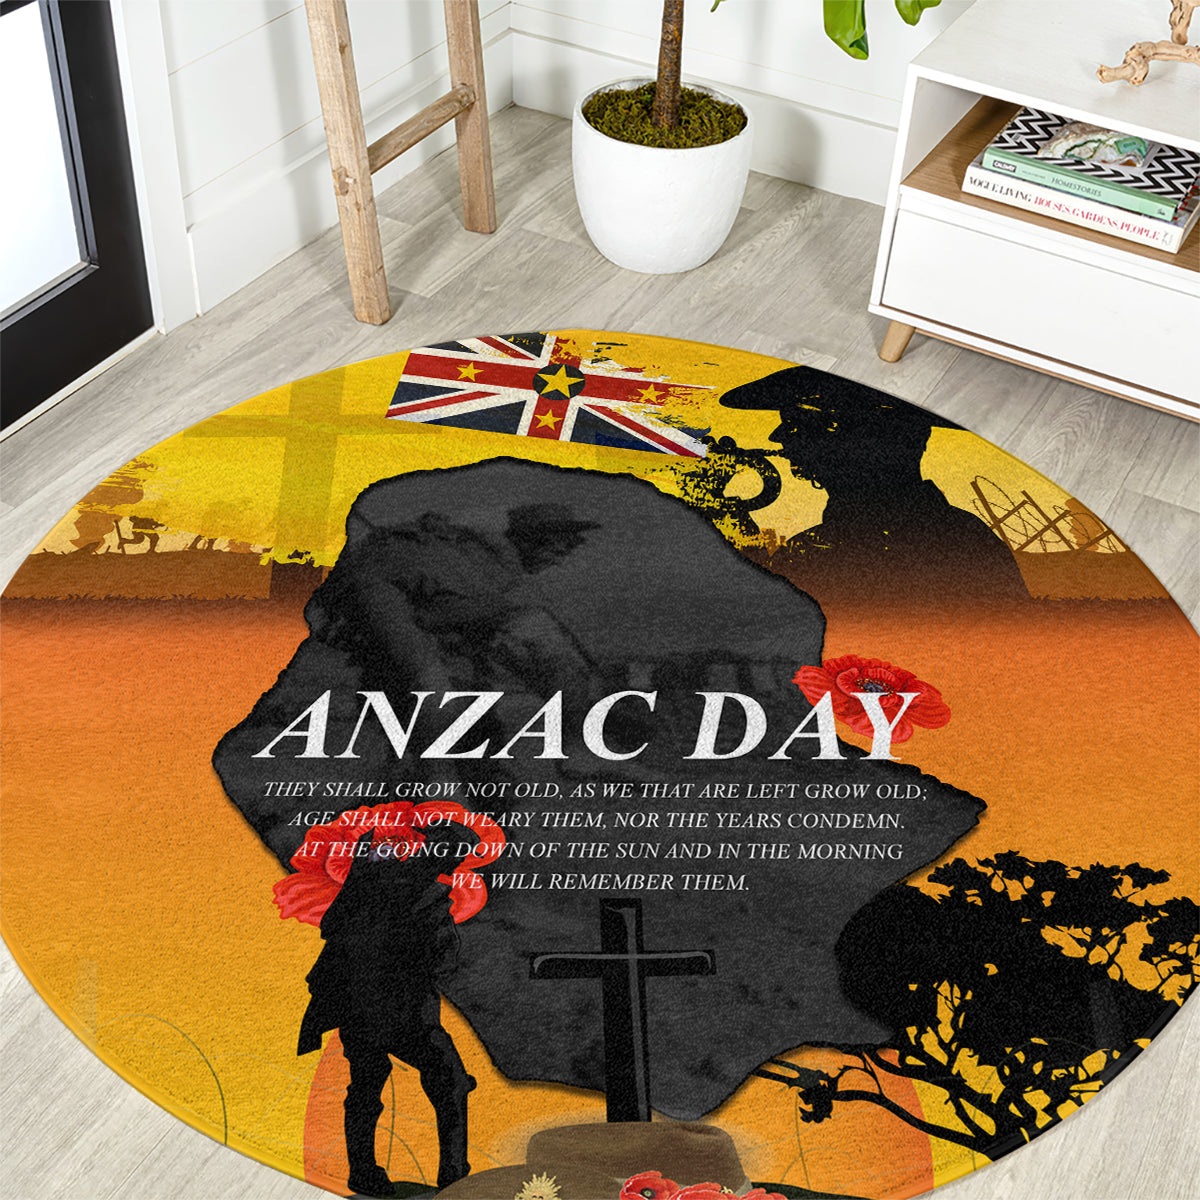 Niue ANZAC Day Round Carpet Soldier and Gallipoli Lest We Forget LT03 Yellow - Polynesian Pride